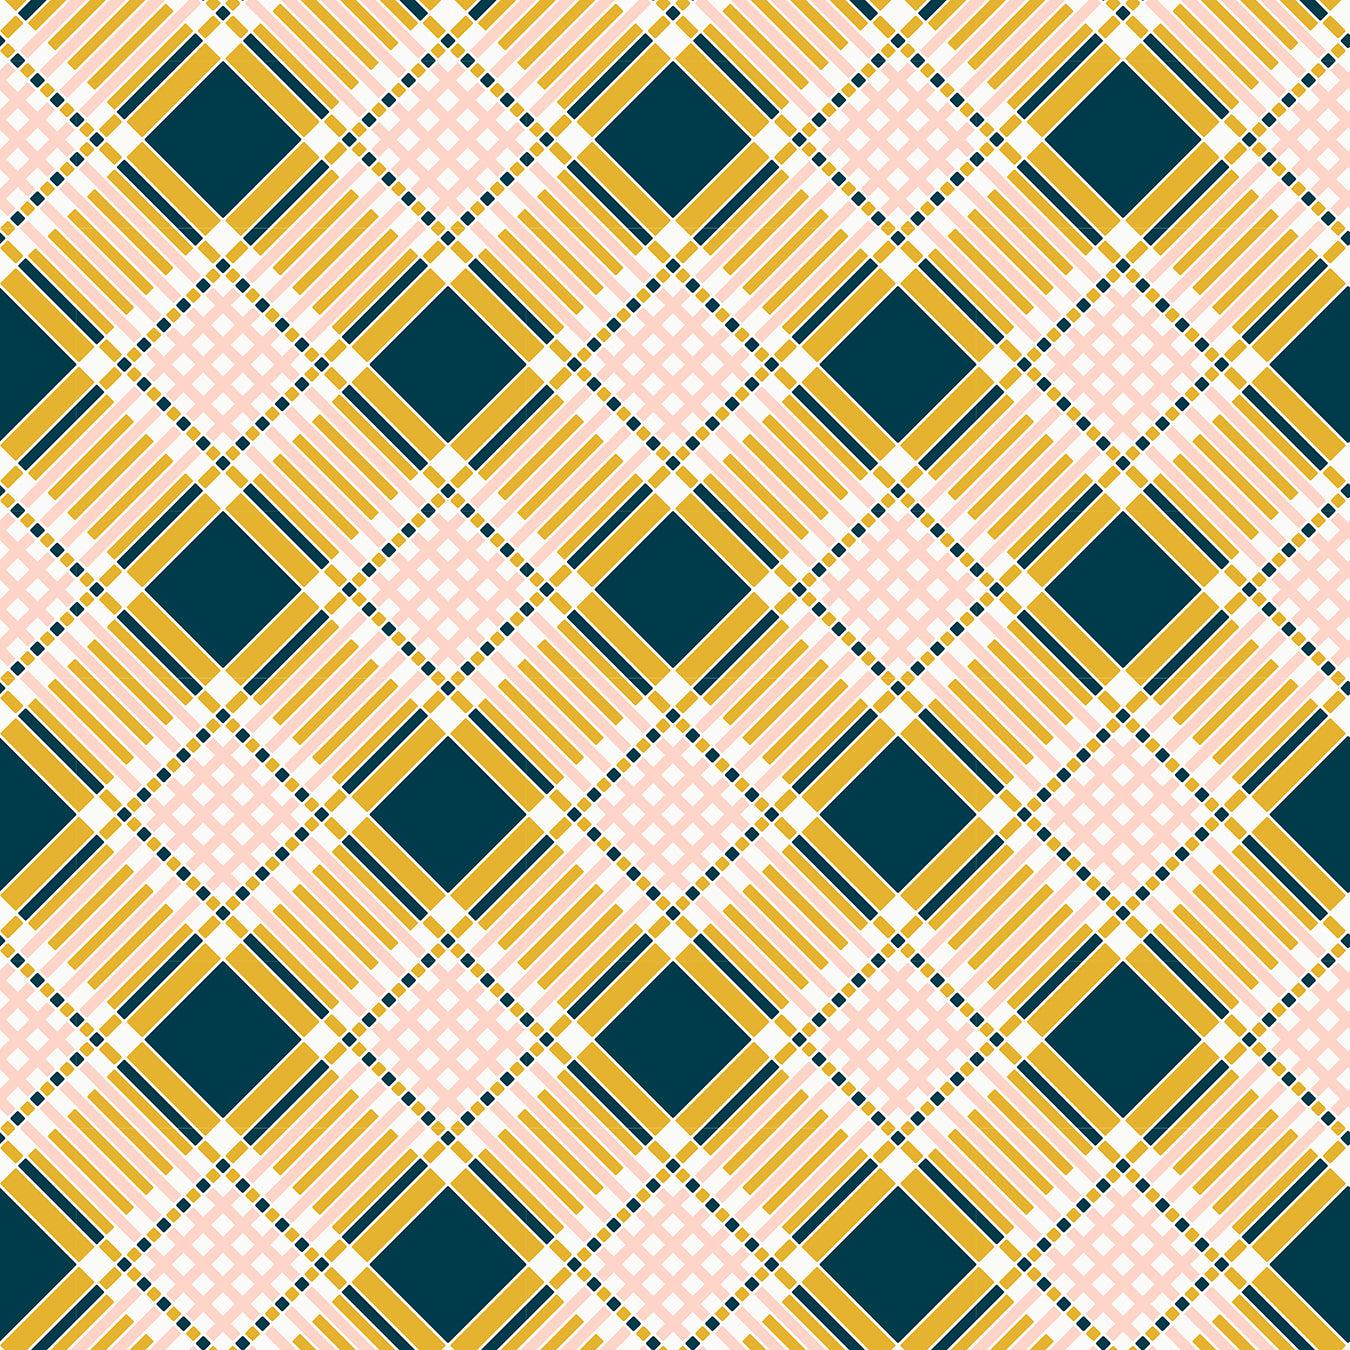 Ruby Star Society-Plaid Goldenrod-fabric-gather here online